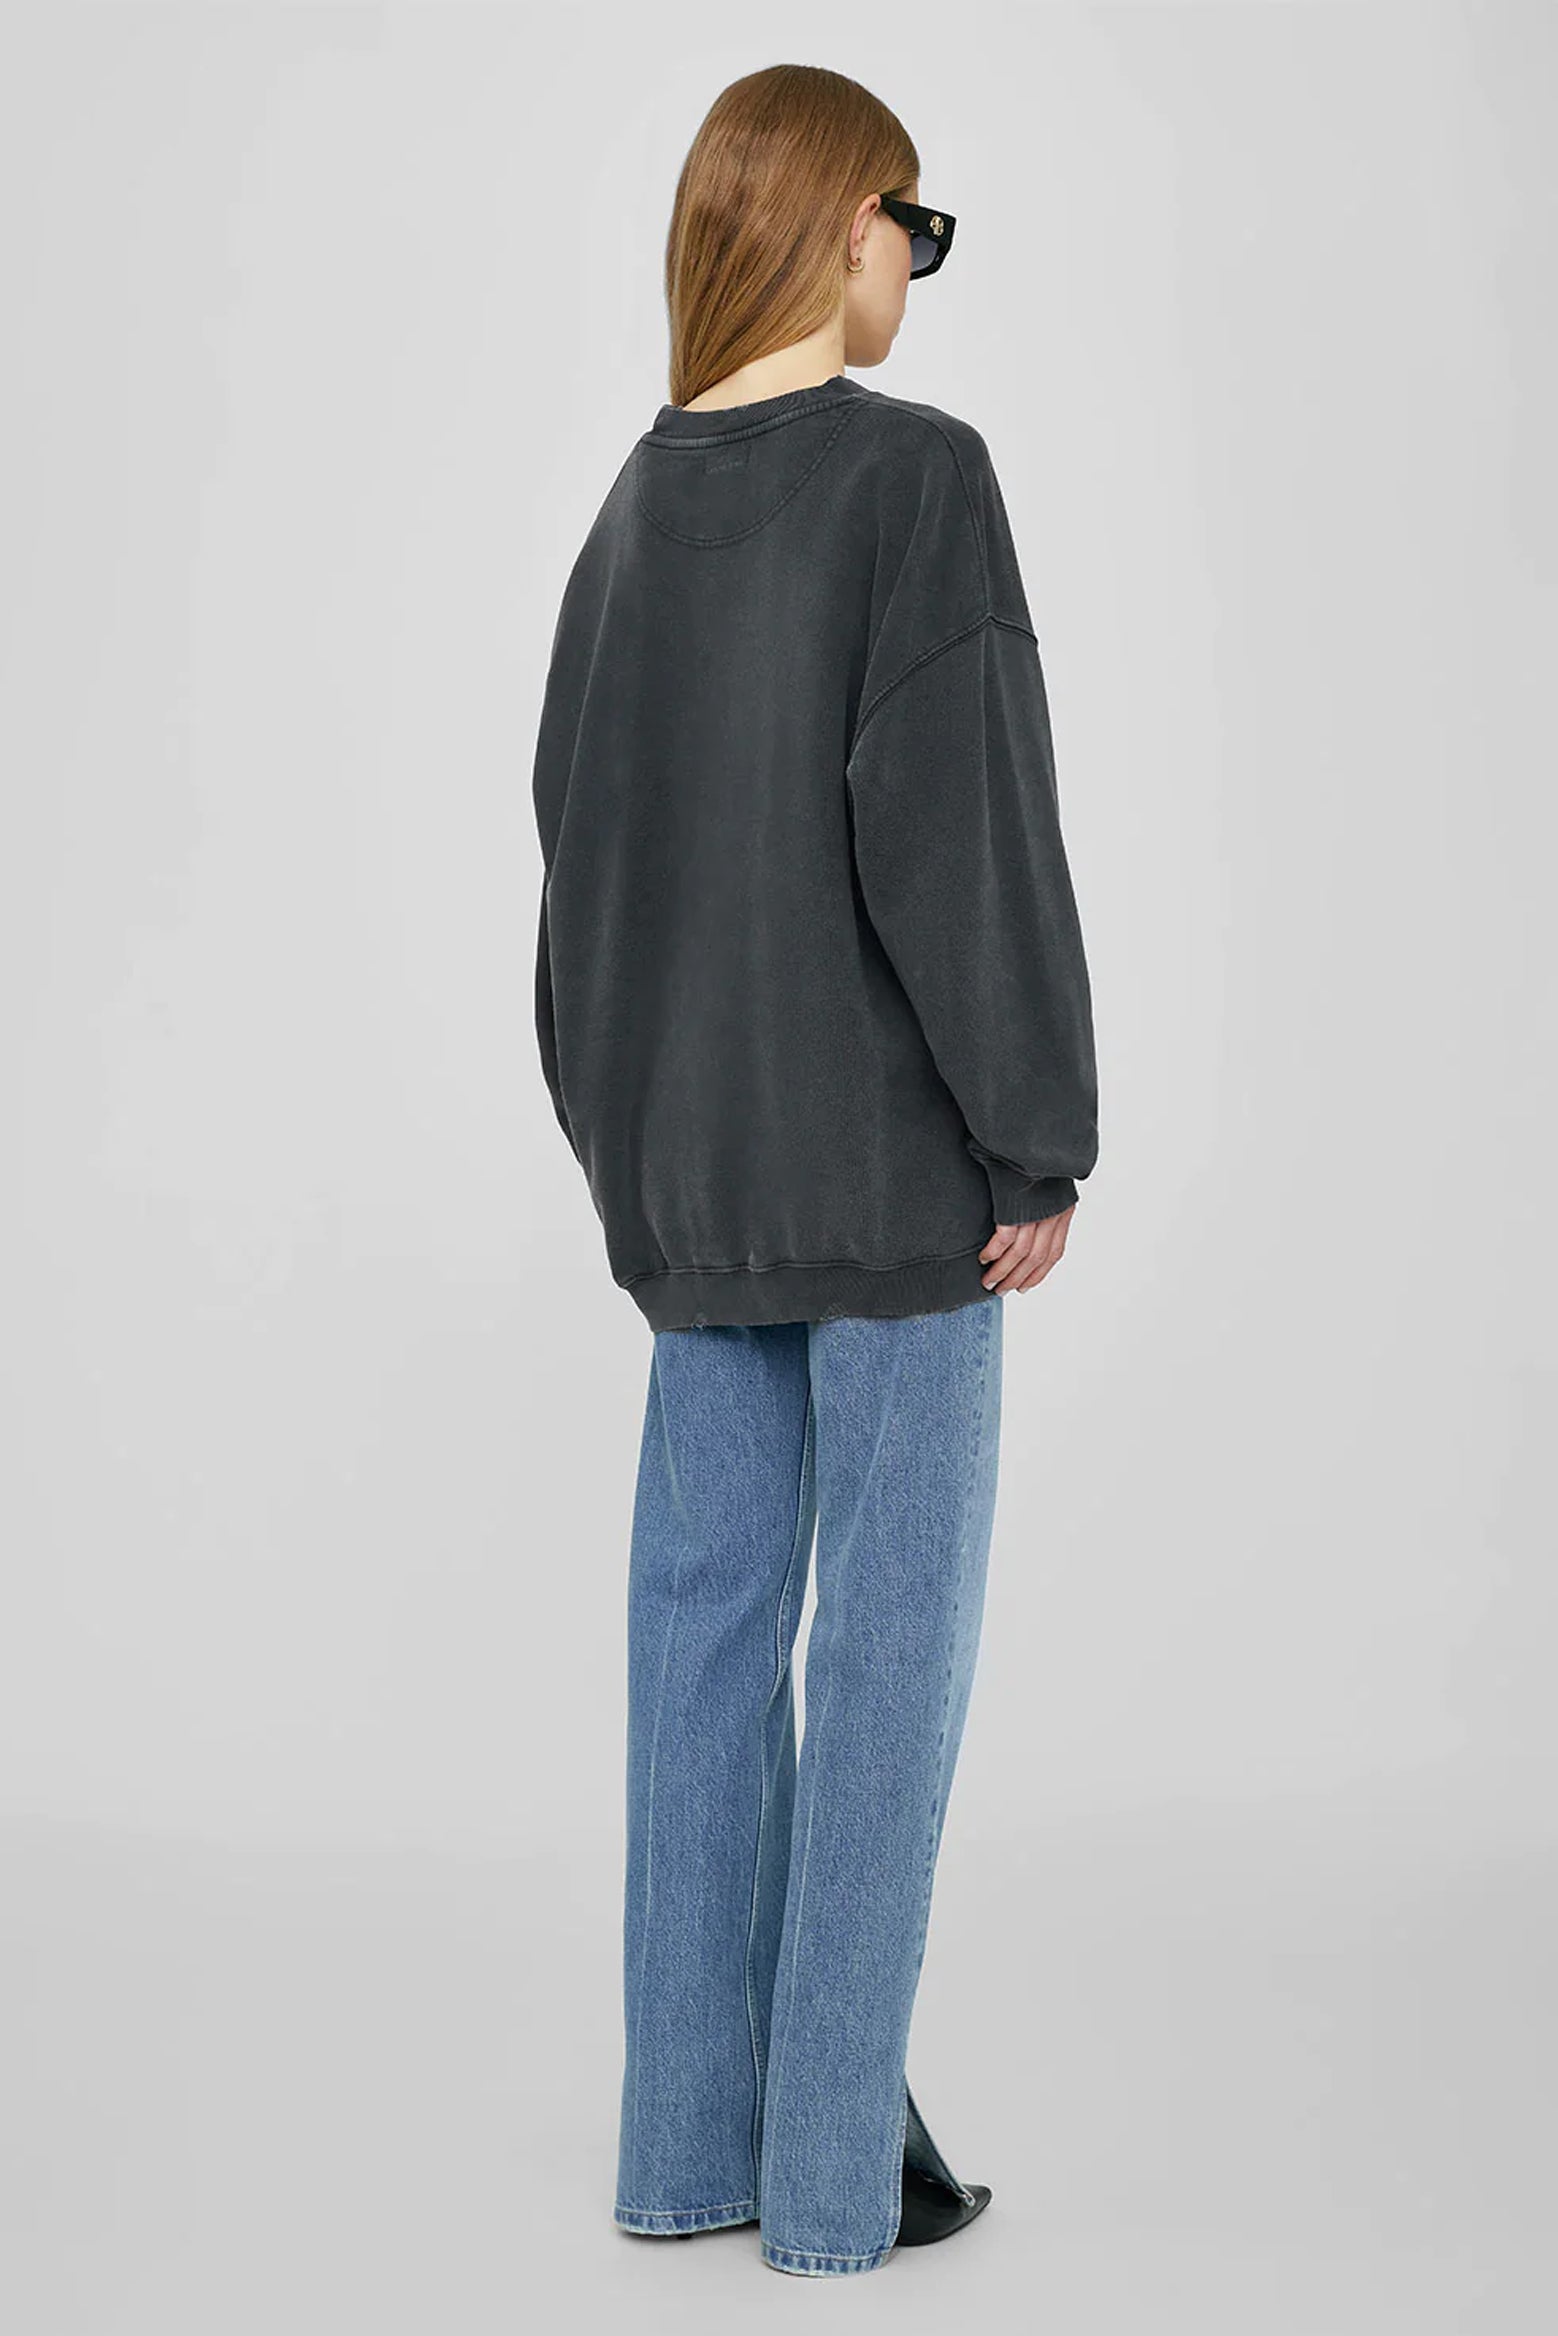 ANINE BING Tyler Sweatshirt in Washed Black available at The New Trend